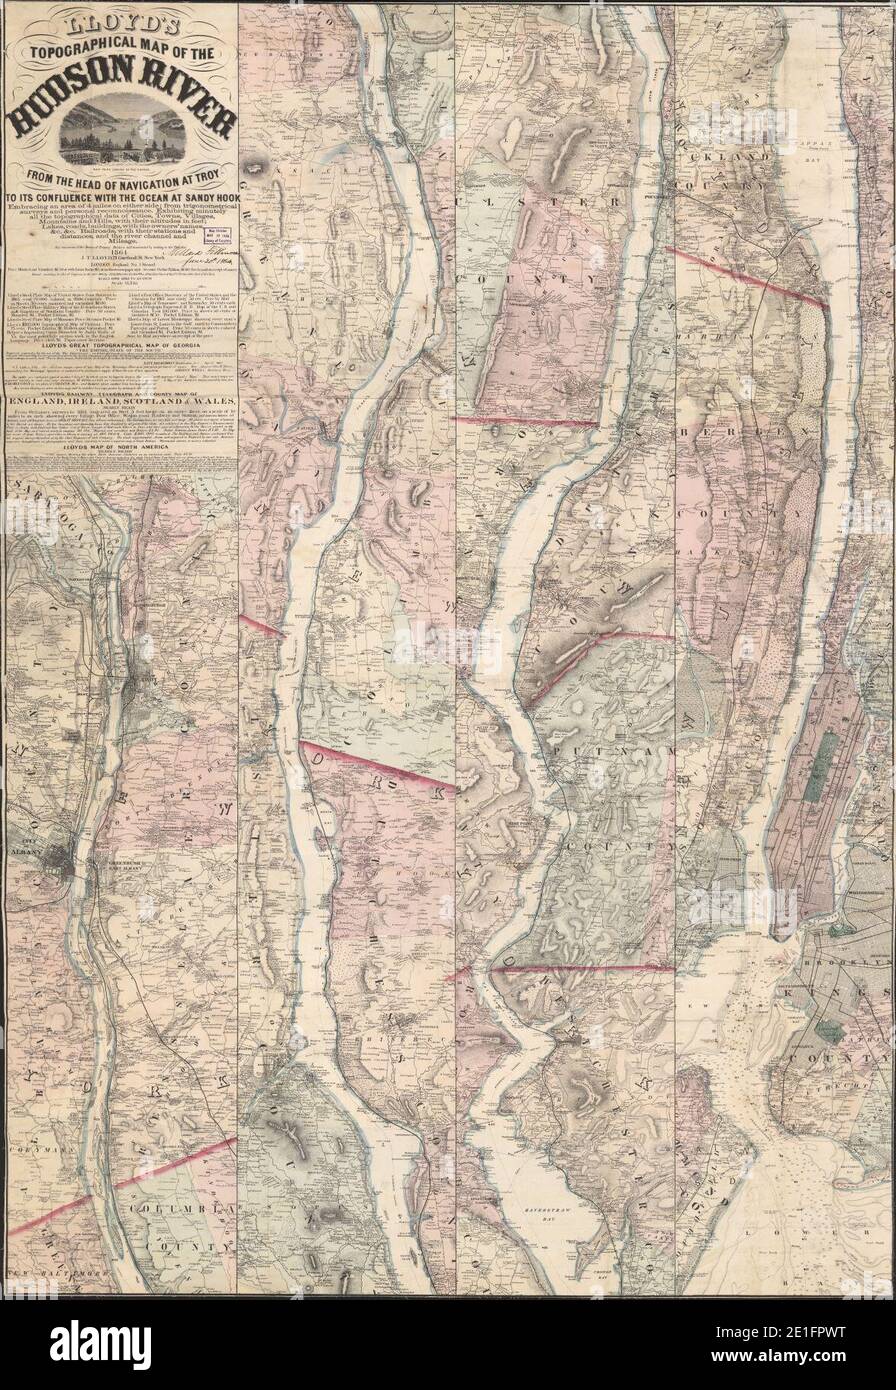 Lloyd's topographical map of the Hudson River - from the head of navigation at Troy to its confluence with the ocean at Sandy Hook - embracing an area of 4 miles on either side ... and the river Stock Photo